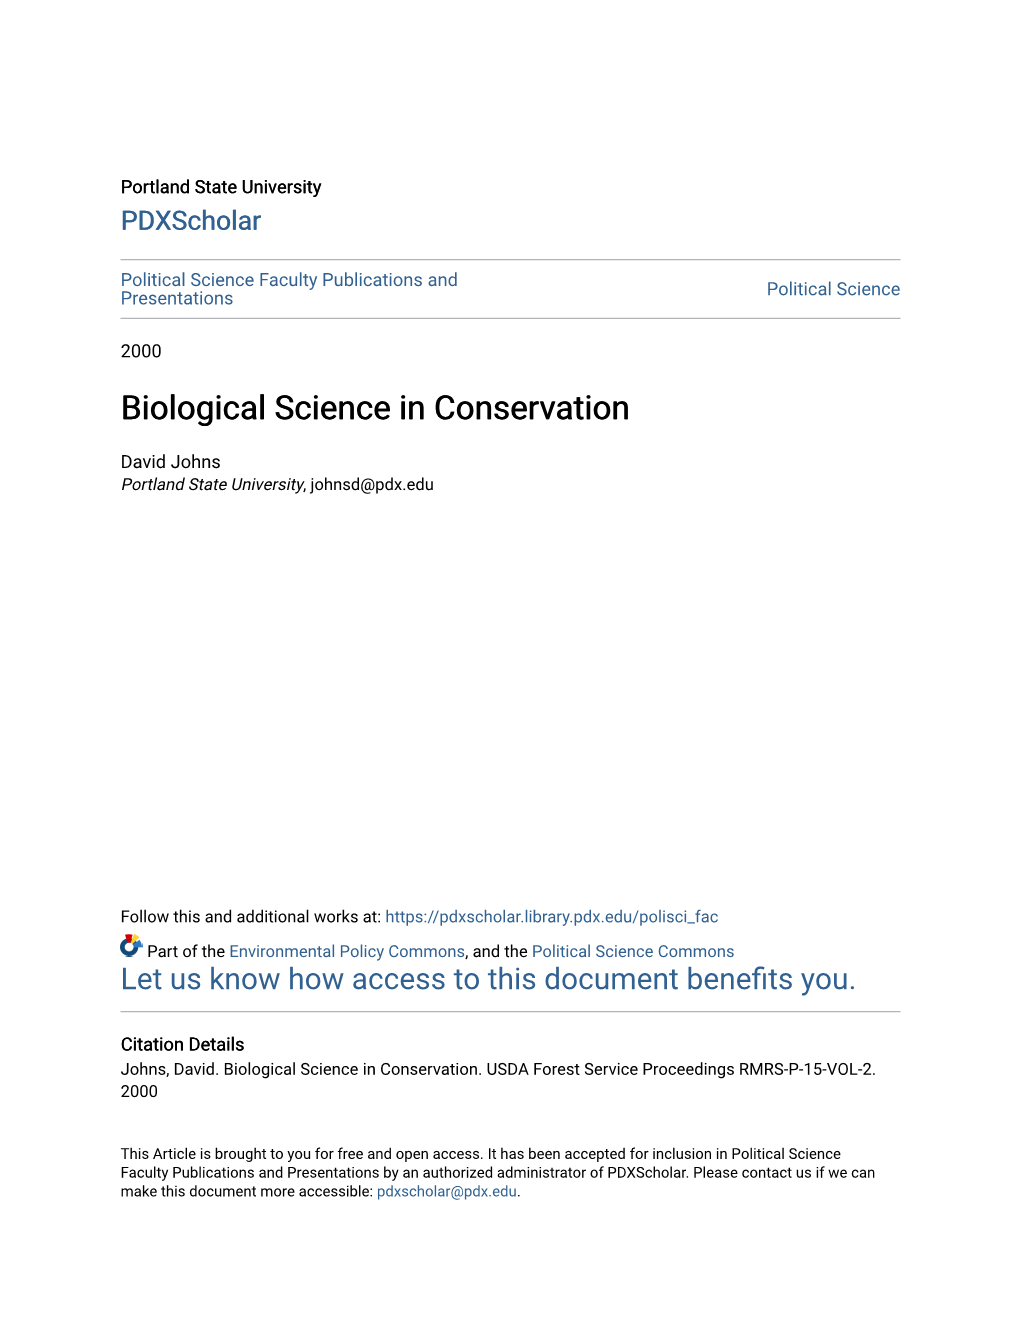 Biological Science in Conservation